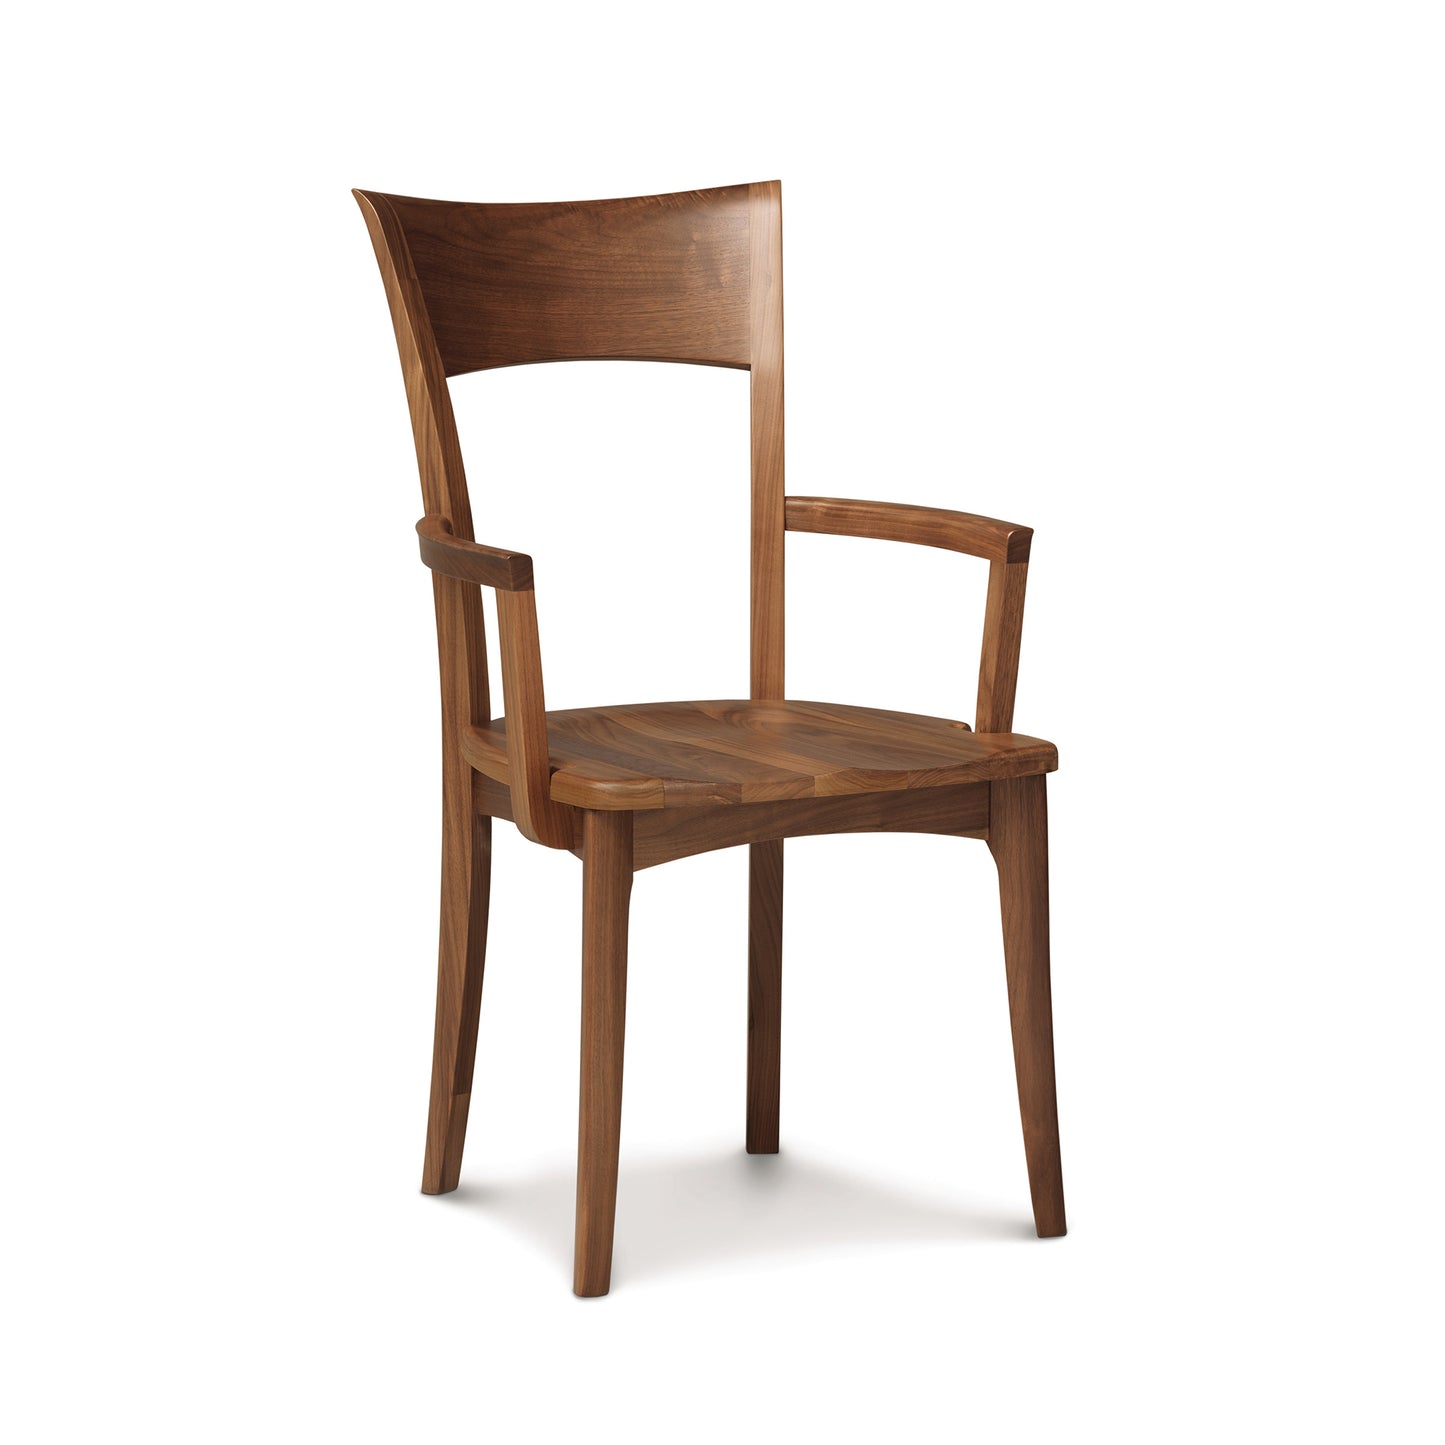 Ingrid Shaker dining chair with armrests isolated on a white background.